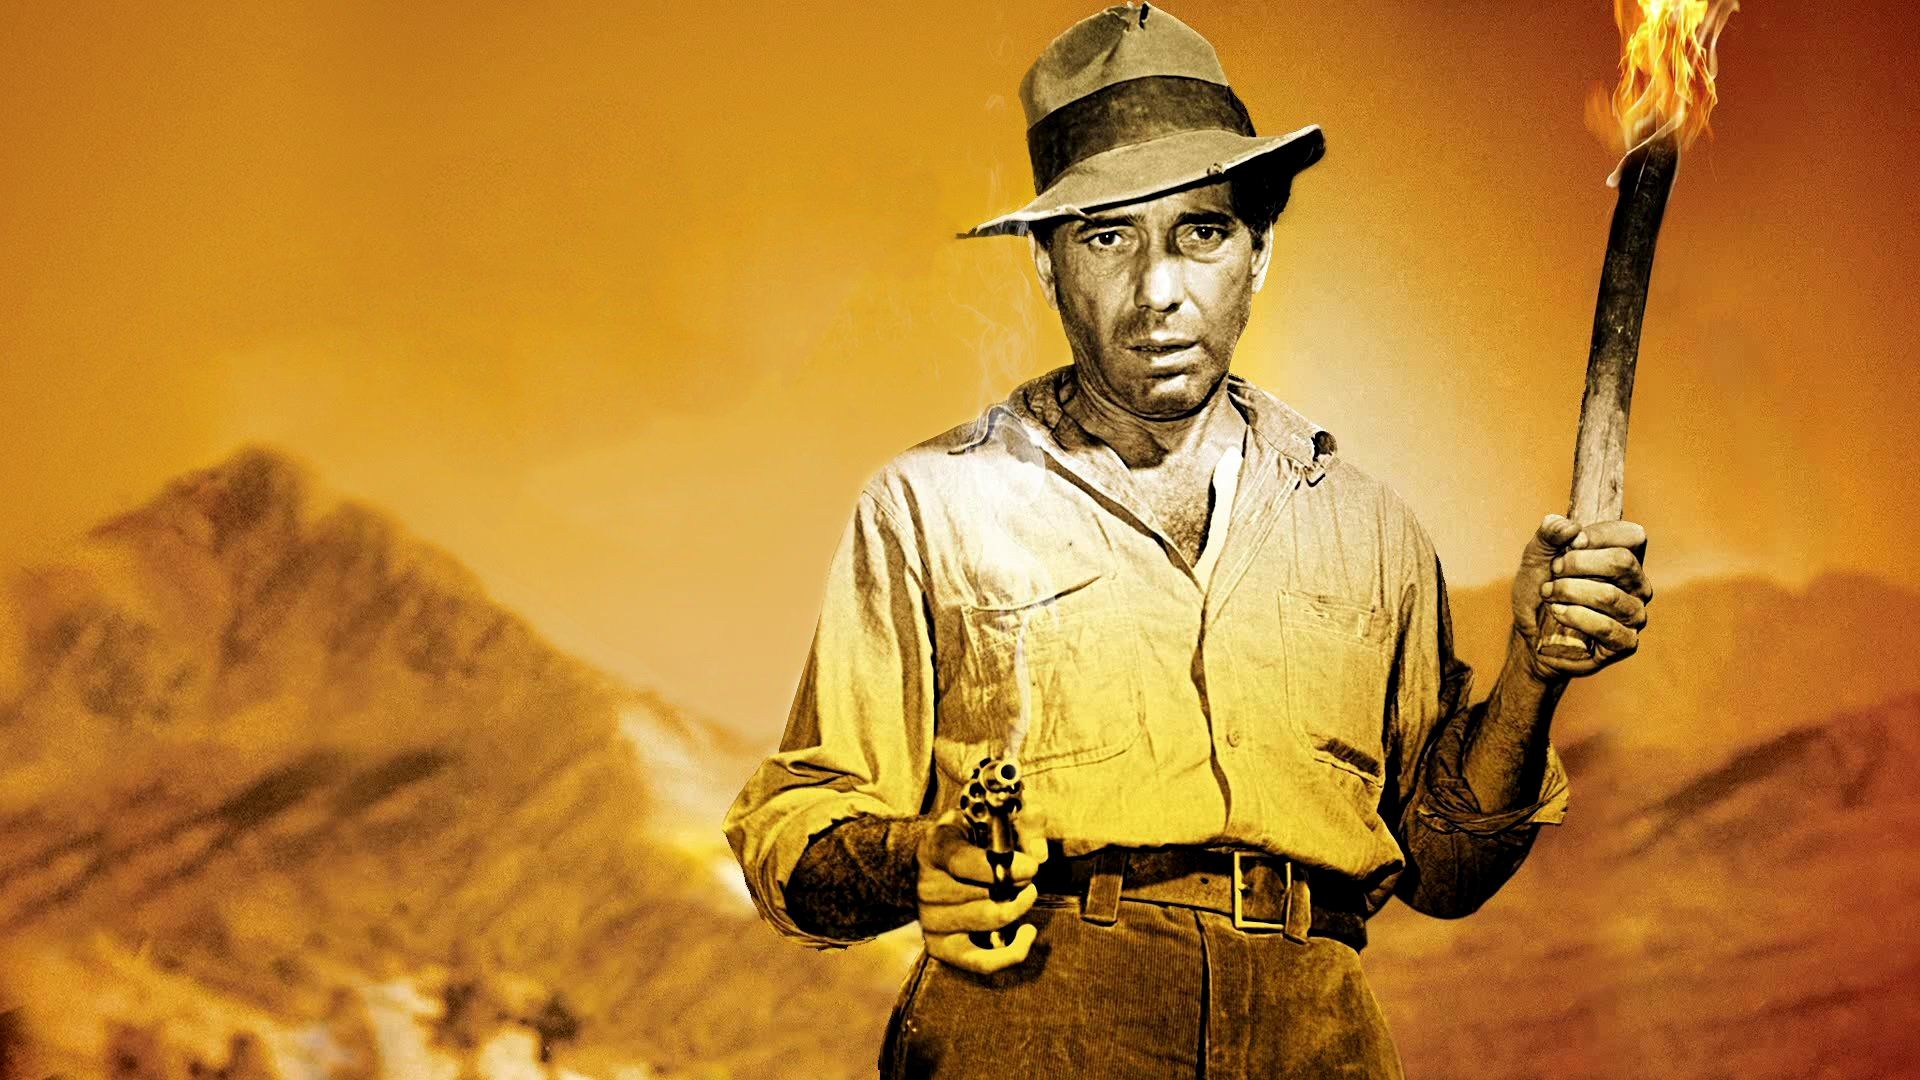 The Treasure of the Sierra Madre background